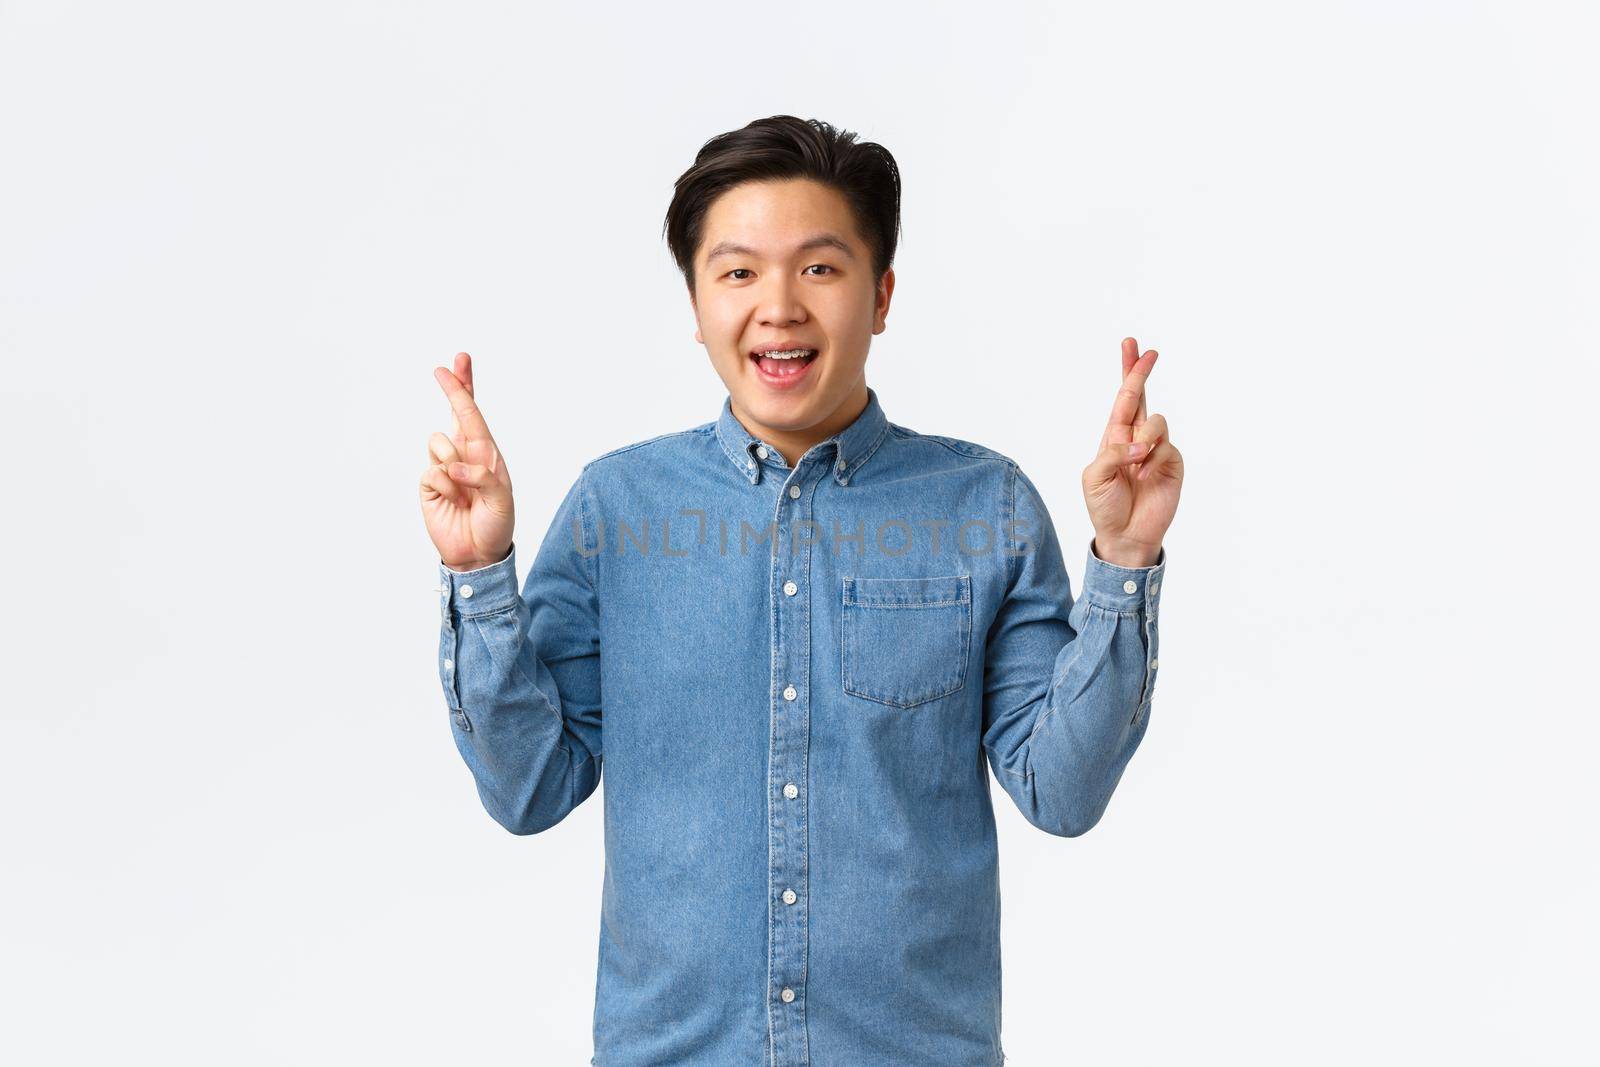 Portrait of hopeful optimistic asian man with braces, smiling upbeat, having faith in dreams come true. Guy making wish with fingers crossed, anticipating miracle, feeling lucky, white background.